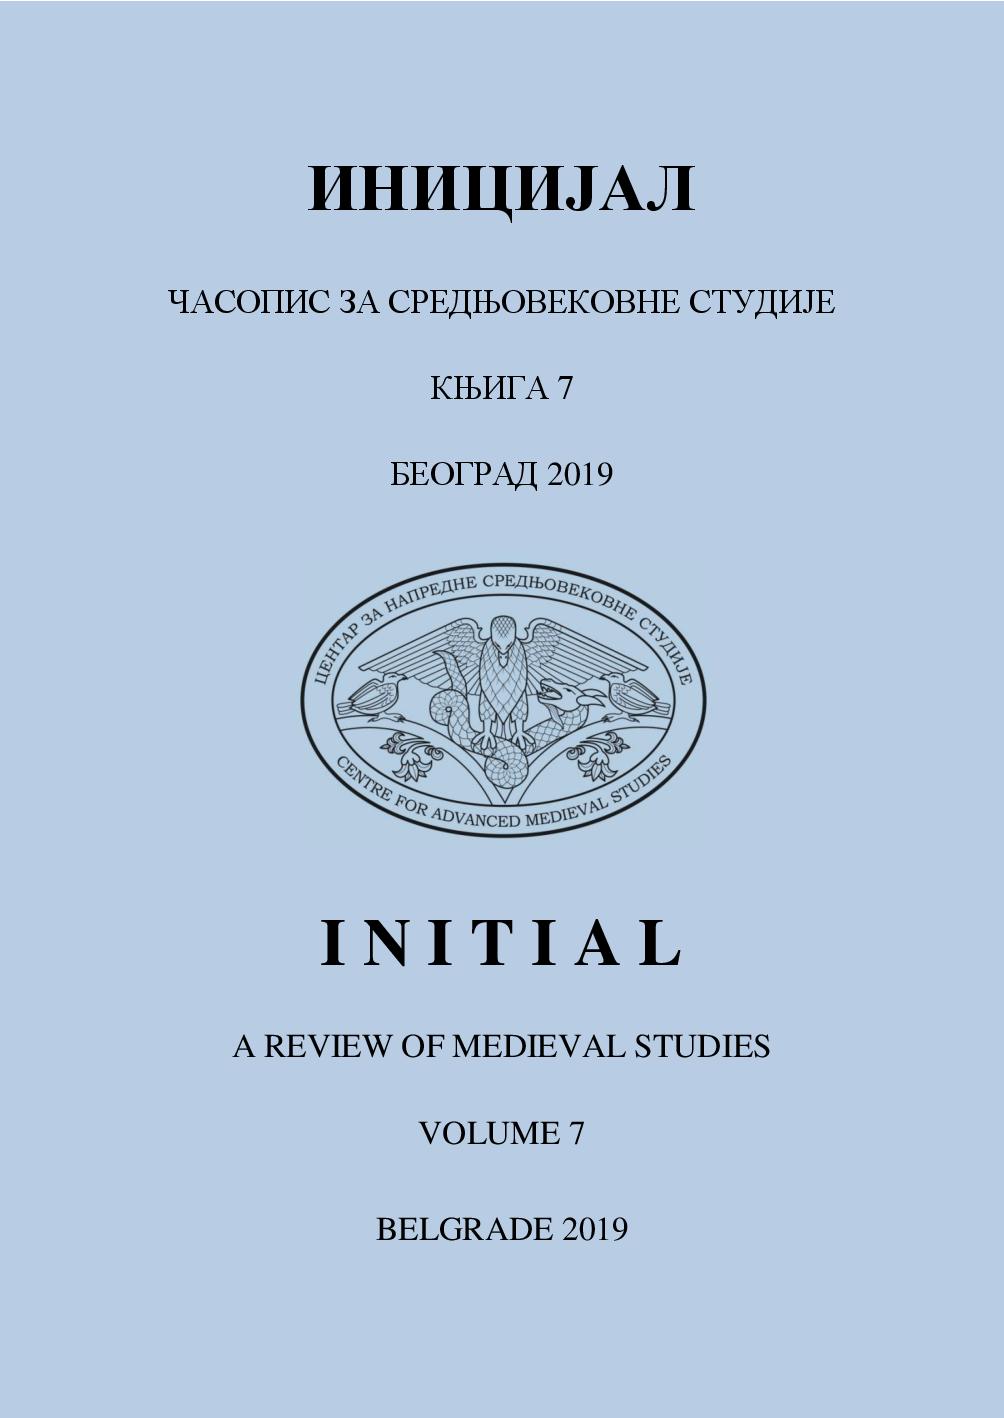 SLAVONIC LITERATURE AND BYZANTINE APOLOGETICS/POLEMICS AGAINST ISLAM: SOME REMARKS ON THE VITA CONSTANTINI-CYRILLI AND THE NOMOCANON OF ST SAVA Cover Image